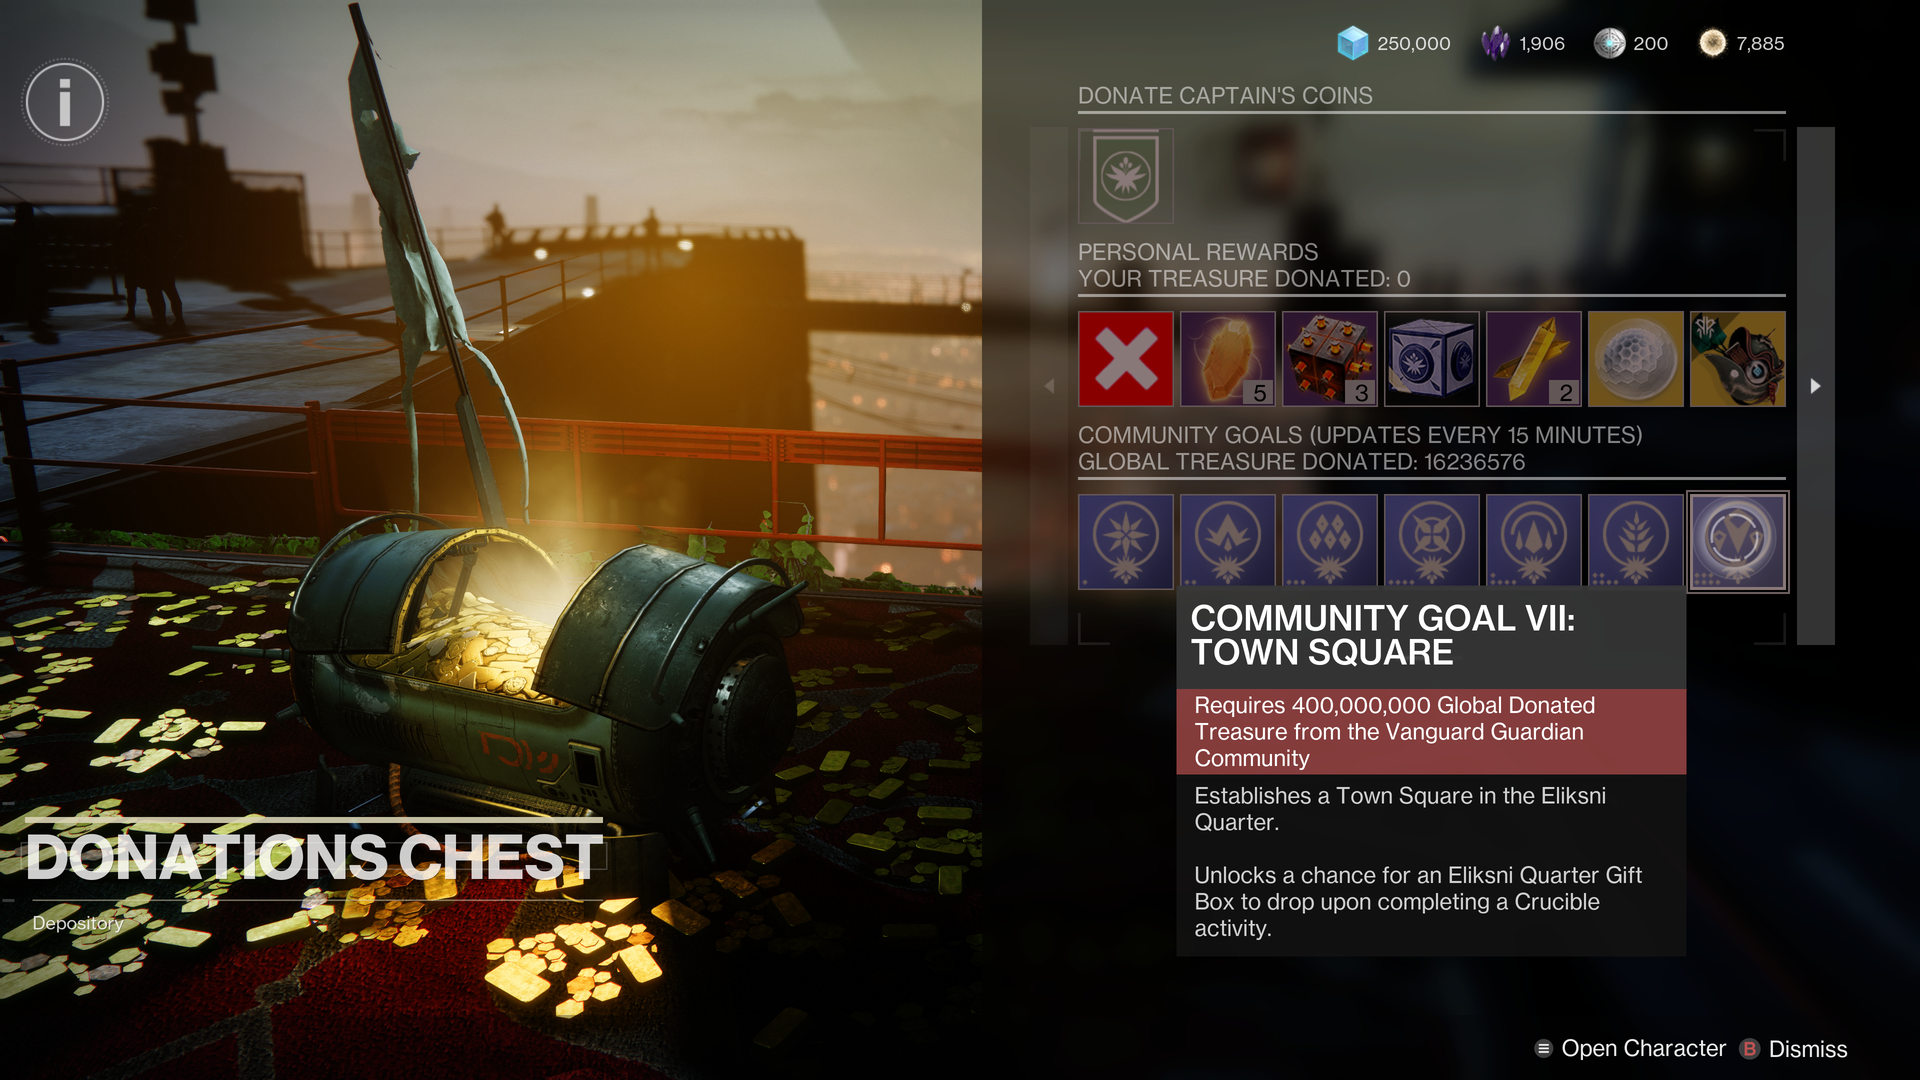 Video game screenshot of a menu in Destiny 2 inviting users to donate 400,00,000 virtual coins to improve an area in the game